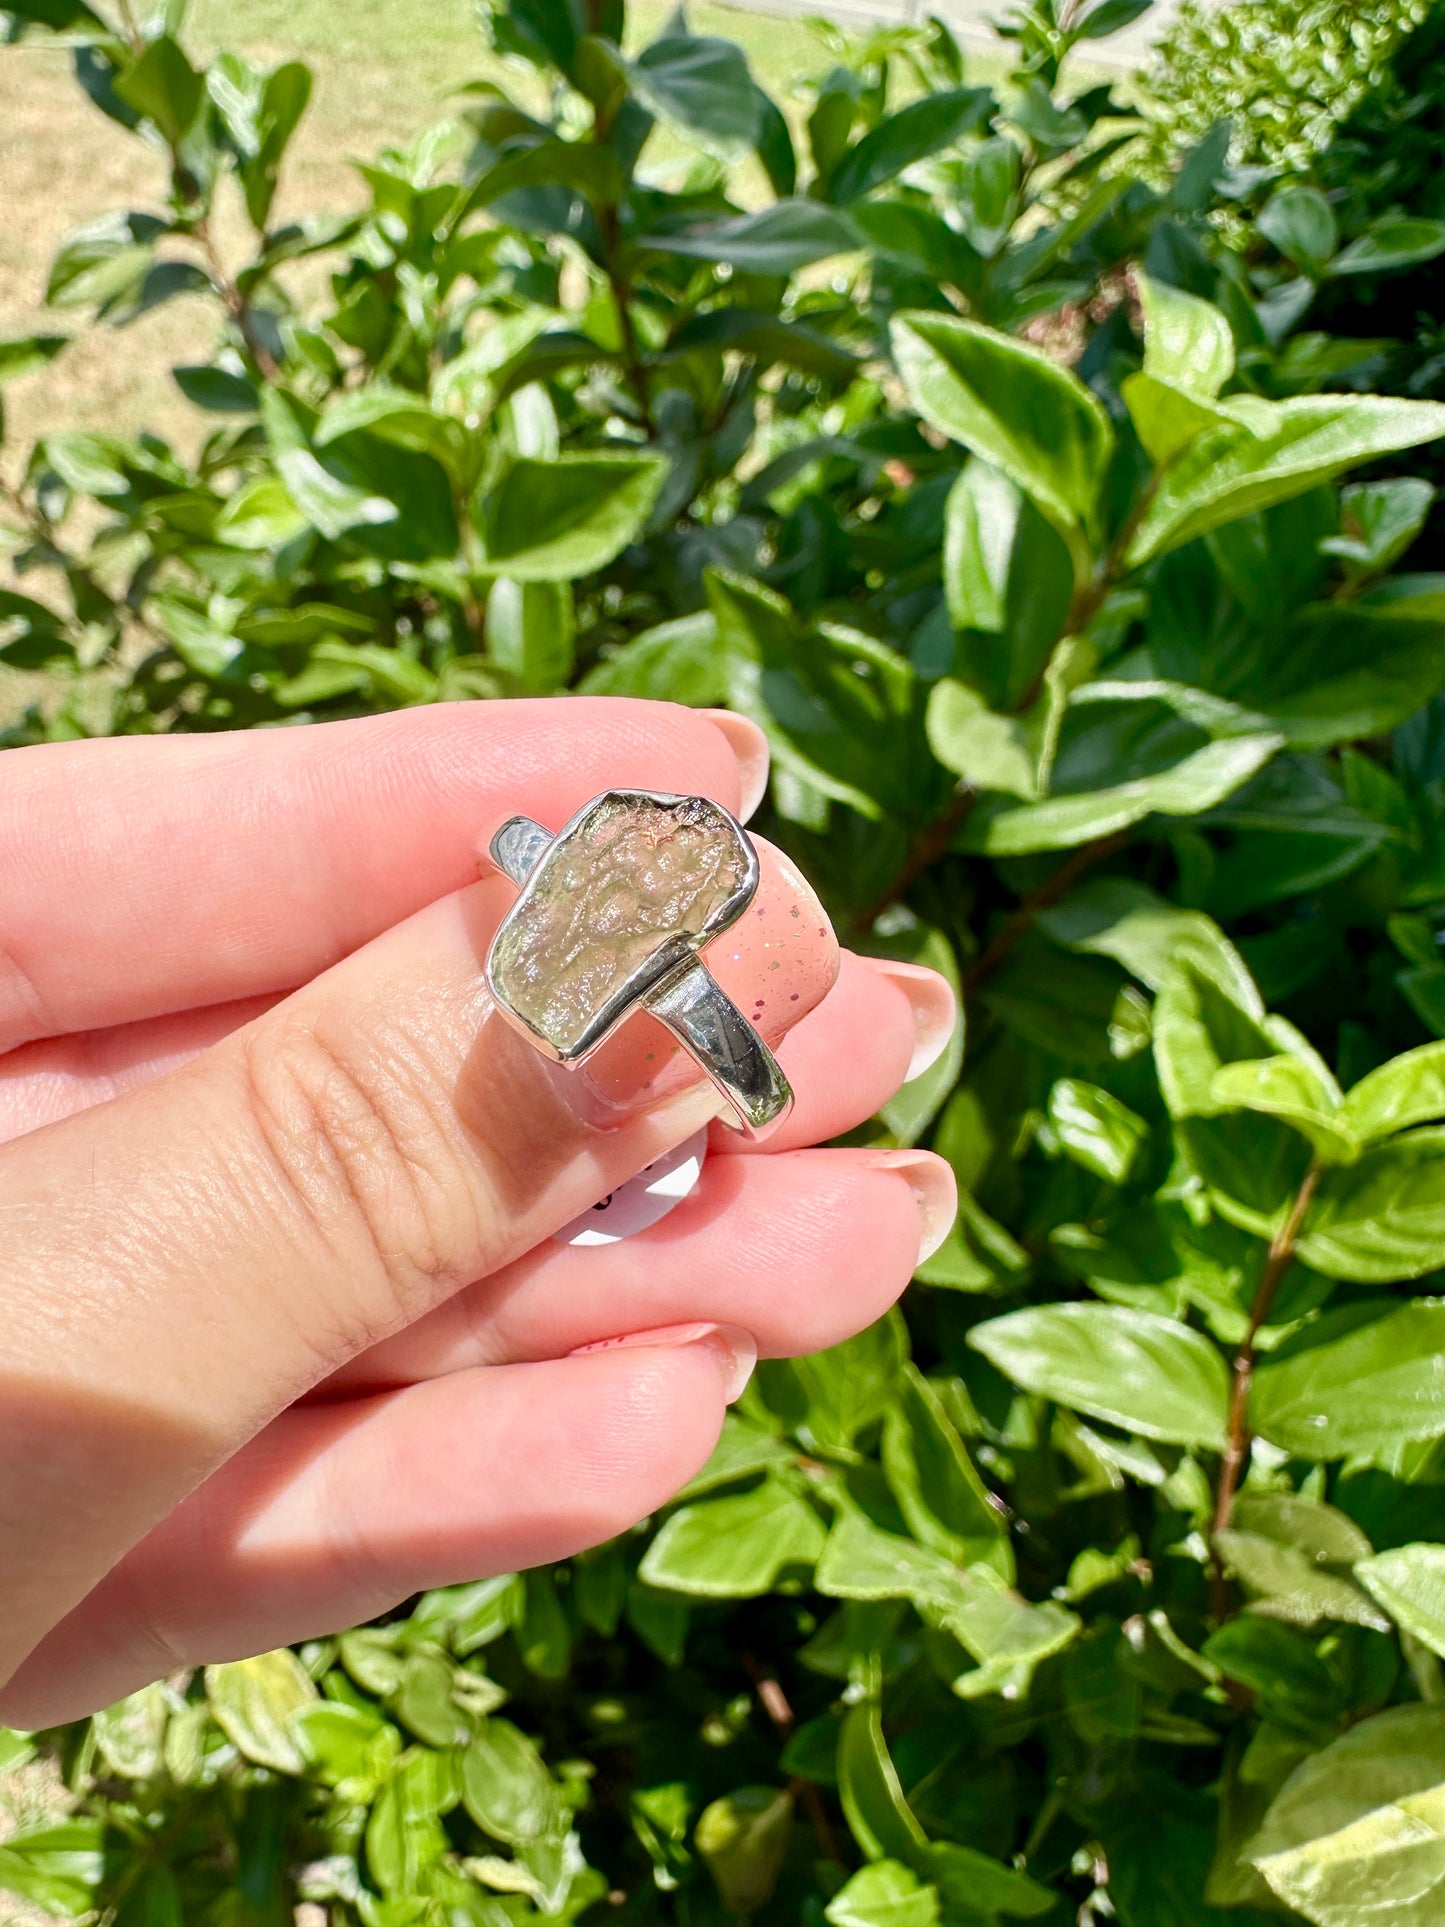 Sterling Silver Moldavite Ring Size 11 - Cosmic Energy and Transformation in Exquisite Handcrafted Jewelry